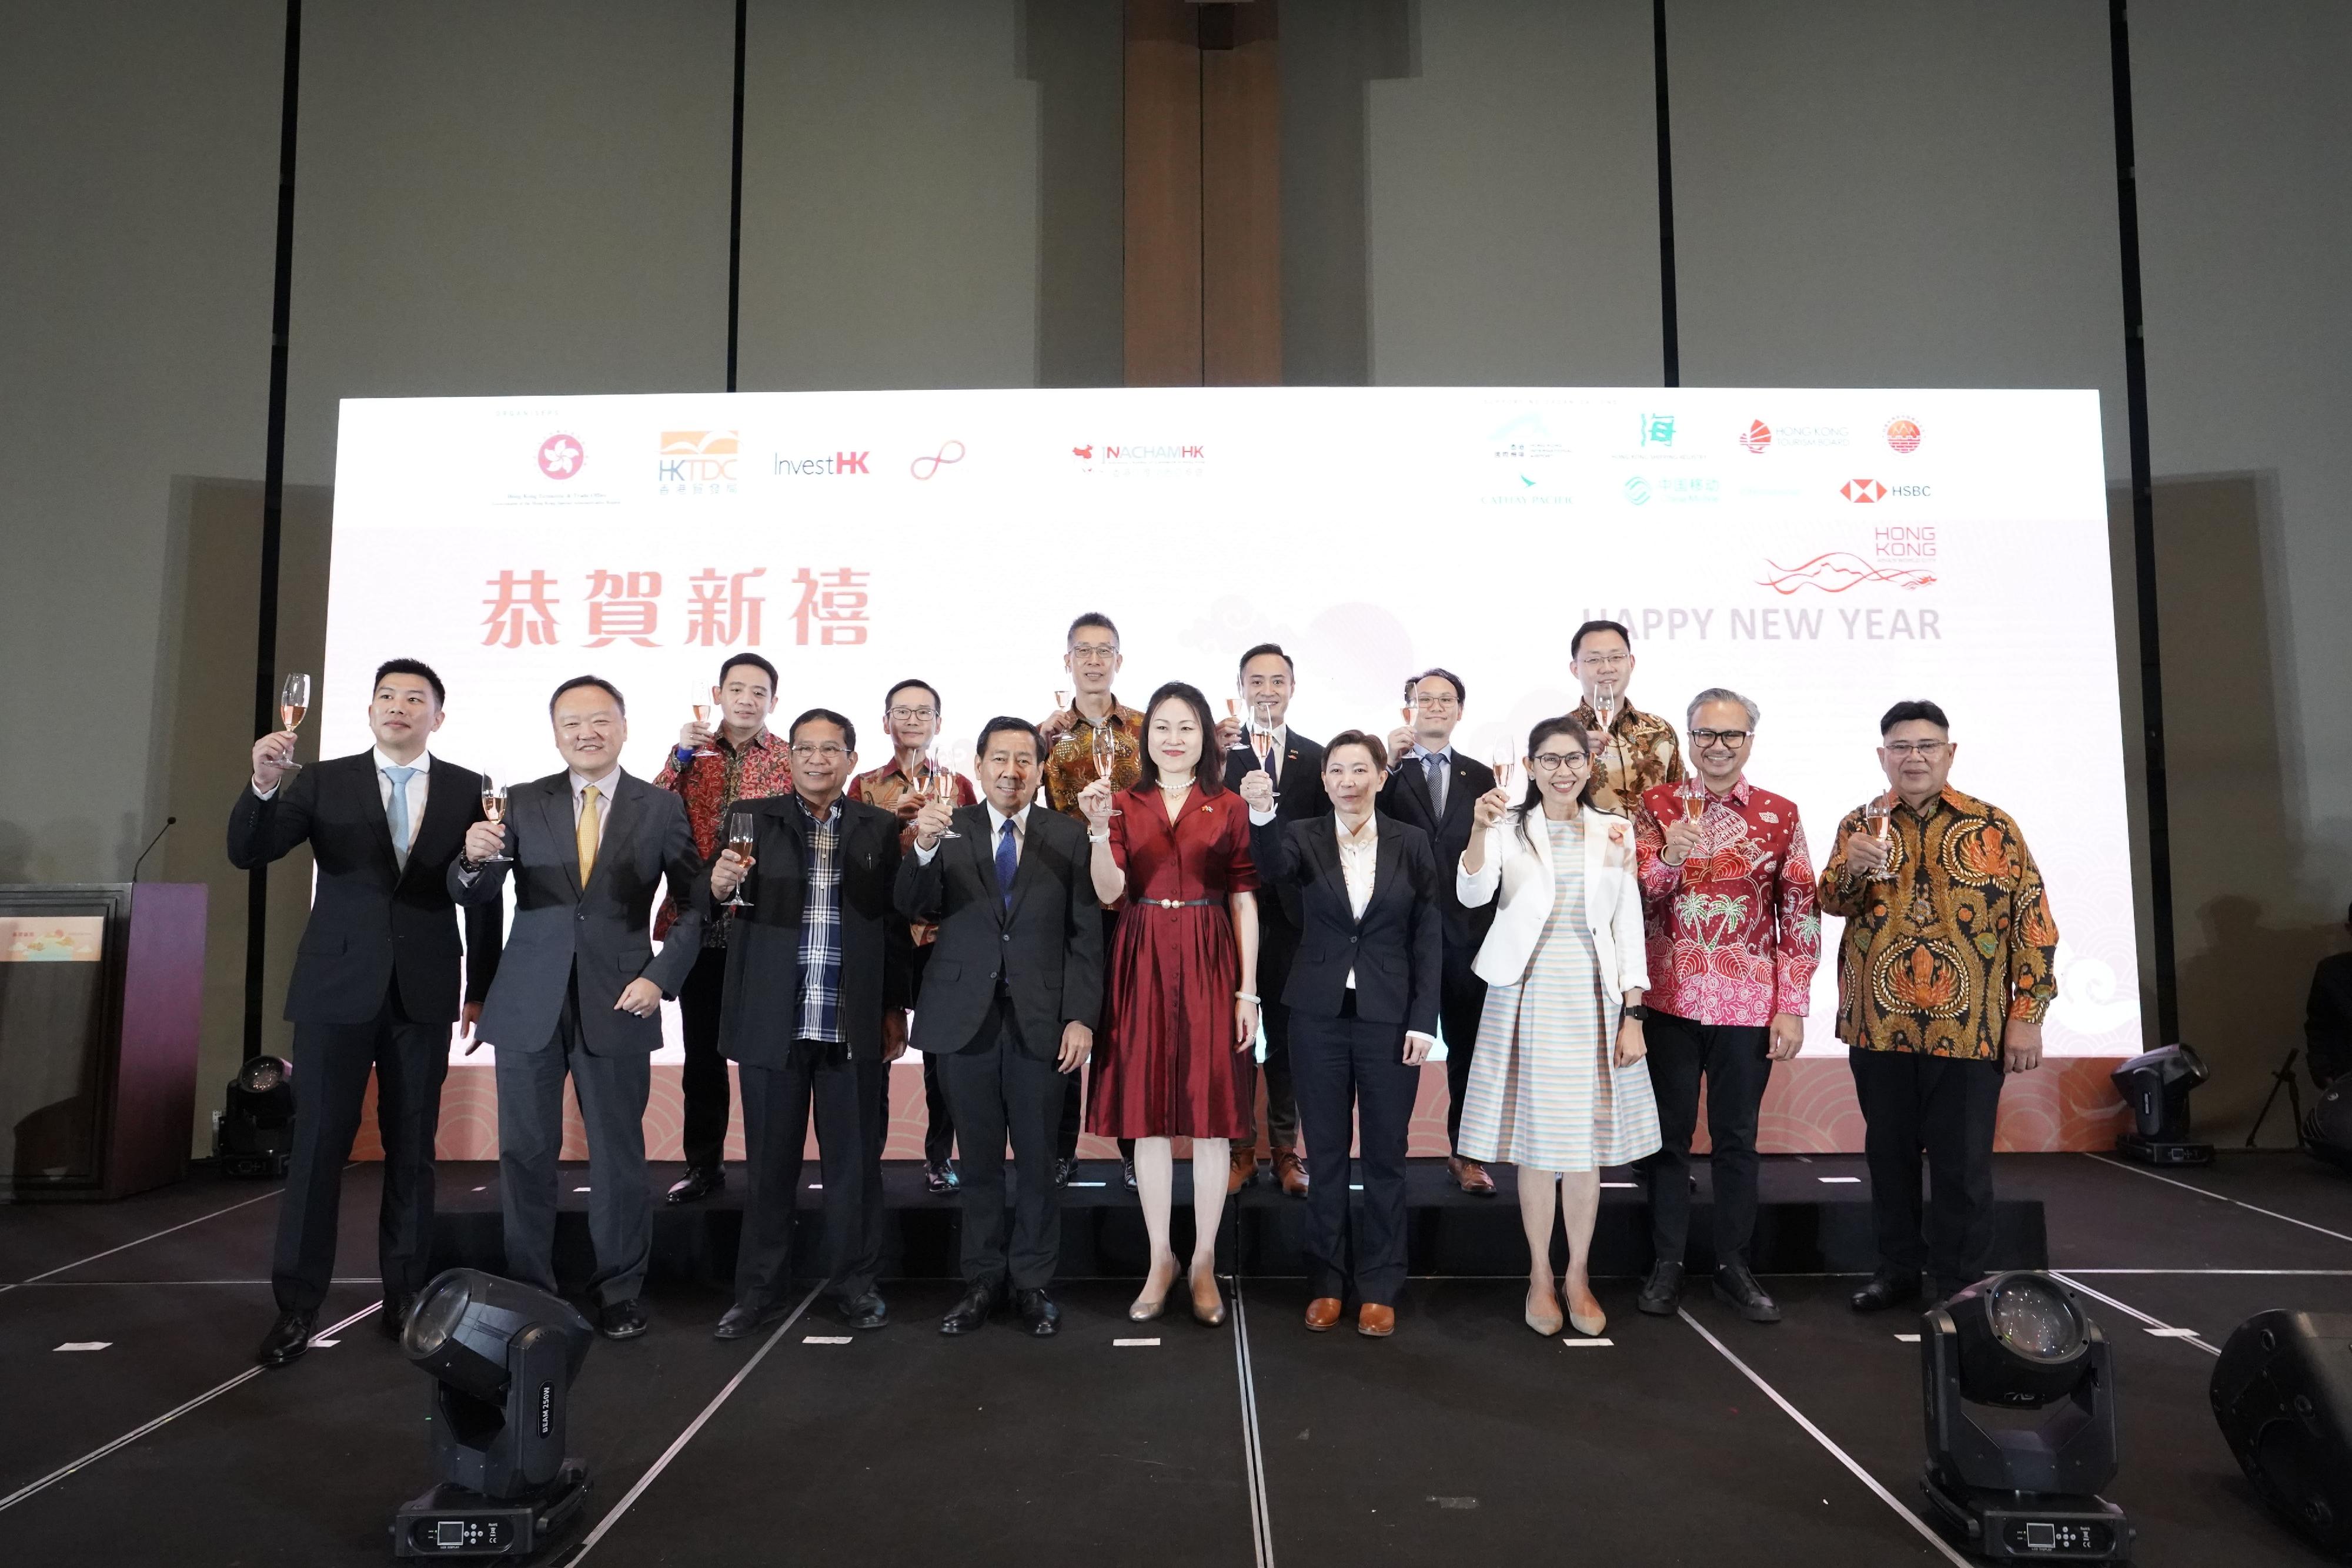 The Hong Kong Economic and Trade Office, Jakarta (HKETO Jakarta) today (February 2) hosted a Chinese New Year dinner in Jakarta, Indonesia. Photo shows the Chinese Ambassador to the Association of Southeast Asian Nations (ASEAN), Ms Hou Yanqi (front row, centre); the Director-General of the HKETO Jakarta, Miss Libera Cheng (front row, fourth right); the Permanent Representative of Lao DPR to ASEAN, Mr Bovonethat Douangchak (front row, fourth left); the Permanent Representative of Thailand to ASEAN, Ms Urawadee Sriphiromya (front row, third right); the Regional Director of South East Asia and South Asia of the Hong Kong Trade Development Council, Mr Ronald Ho (front row, second left), and other officiating guests hosting a toasting ceremony.